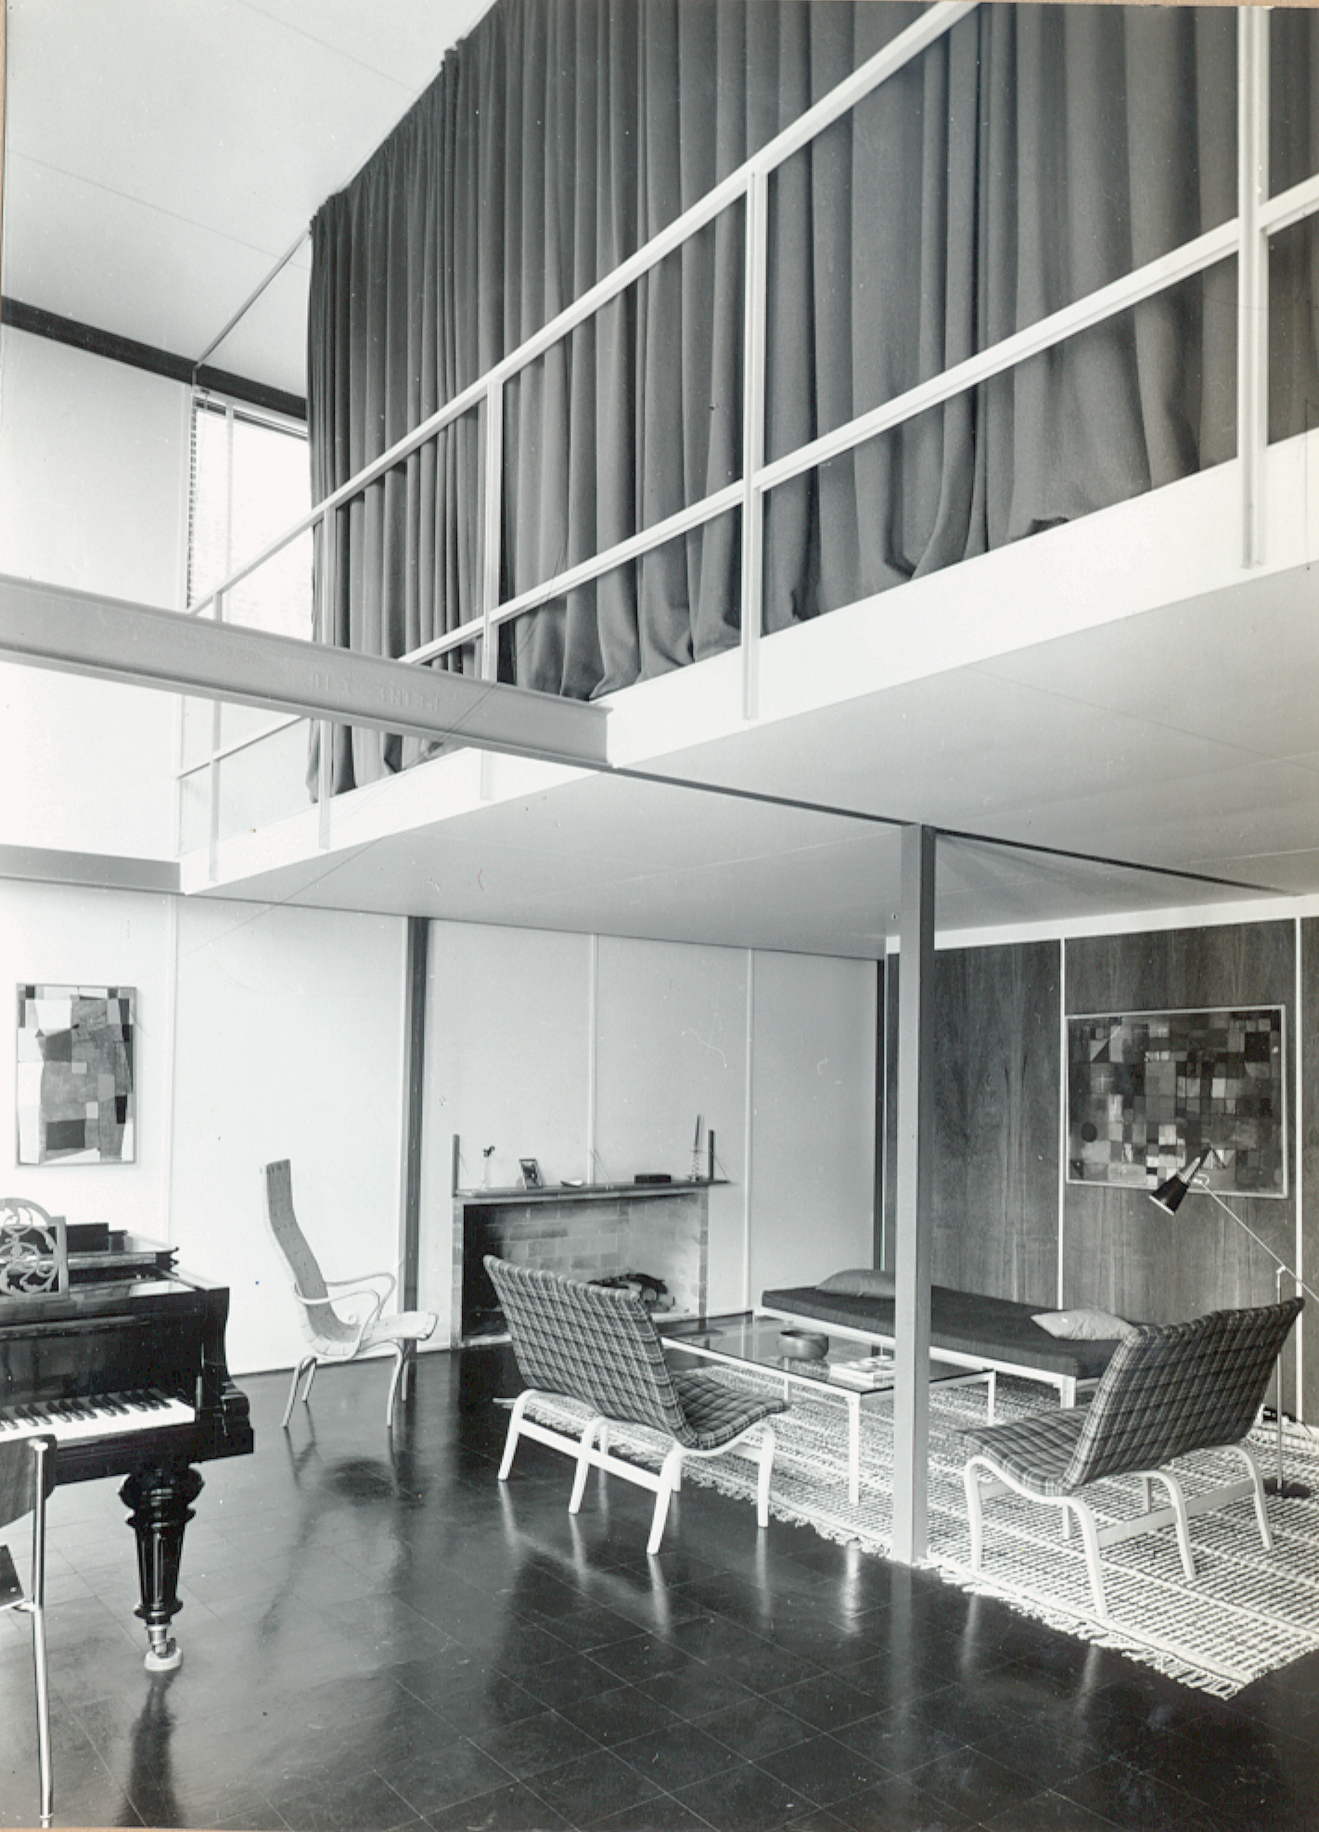 The photographs of Norberg-Schulz took of his house obsessively framed the steel structure and its central column.